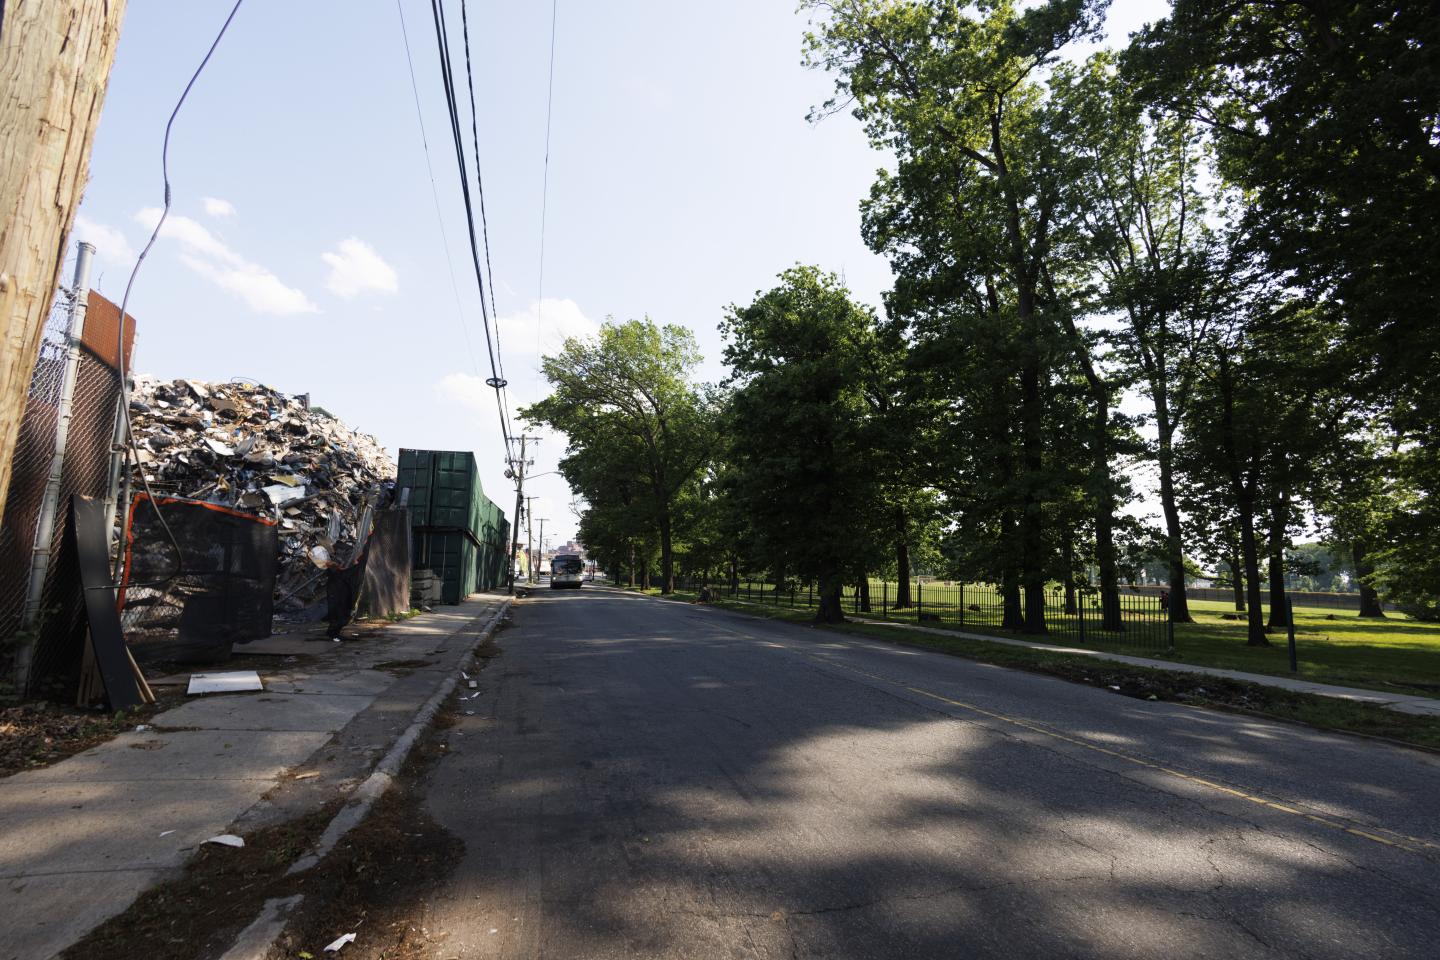 A road in Newark that separates a scrap yard on one side and a park on the other